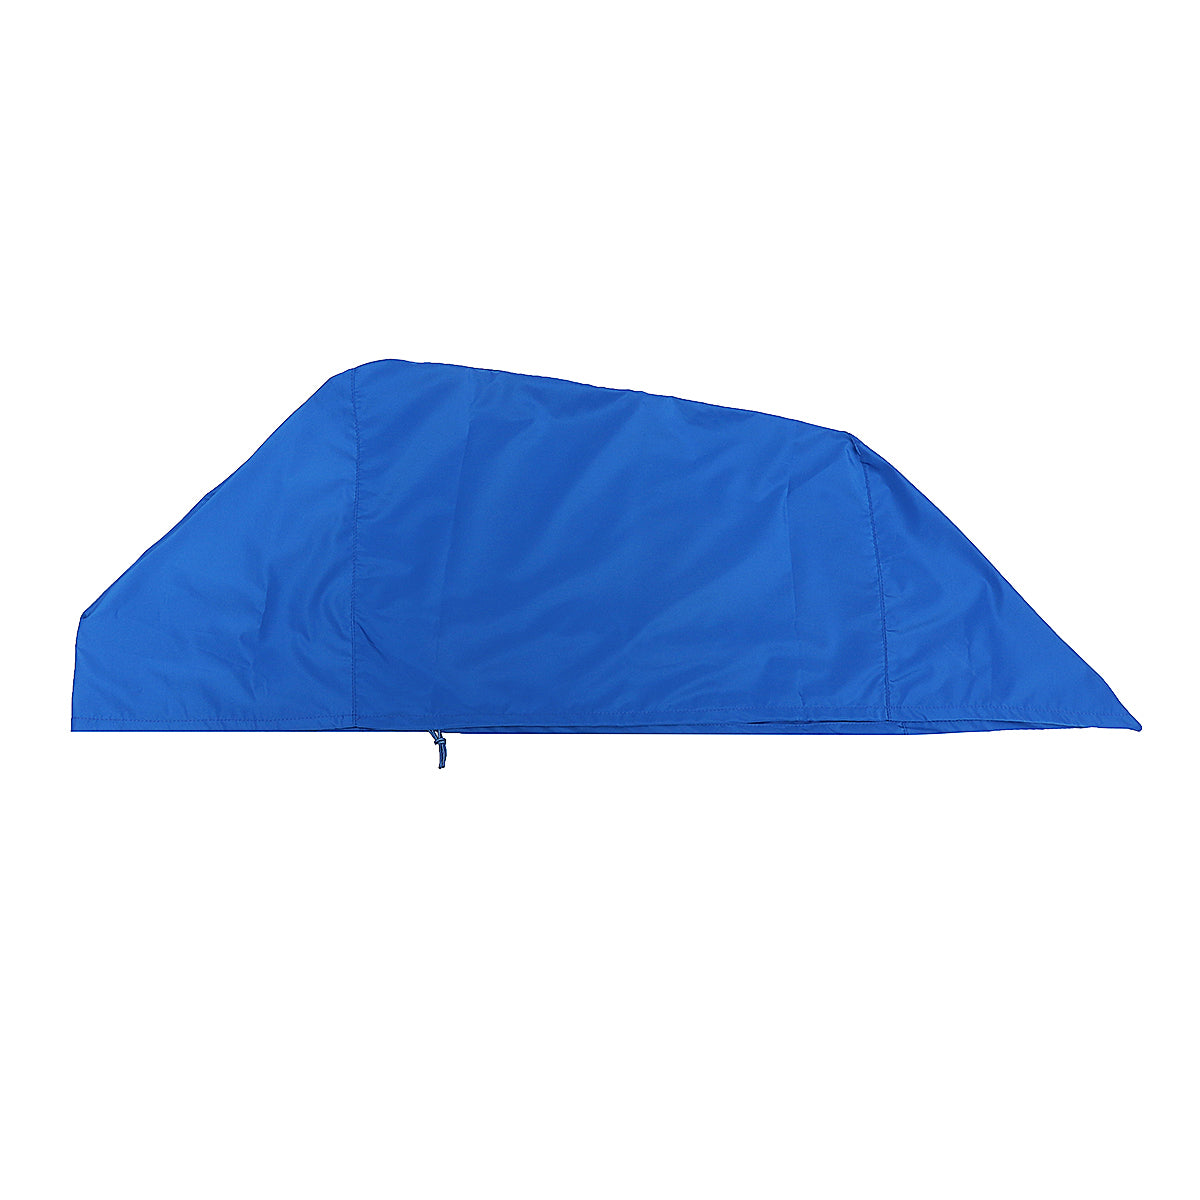 Steel Blue Boat Seat Cover Elastic Rope Drawstring Furniture Dust Outdoor Yacht Waterproof Protection Blue